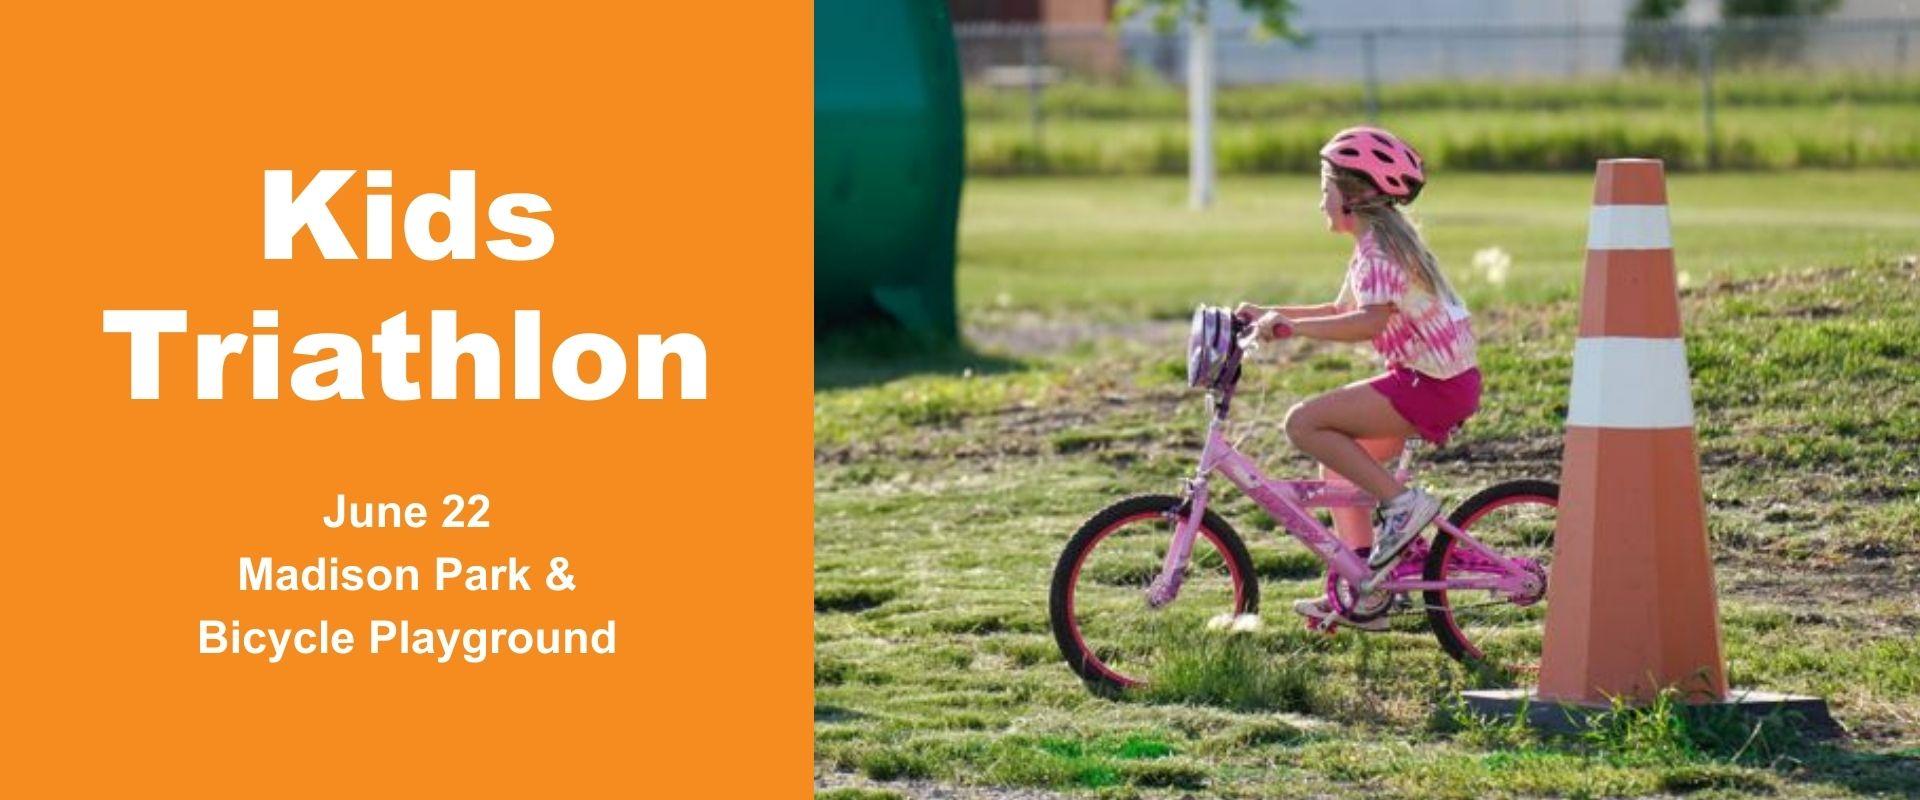 This image shows a graphic of "Kids Triathlon June 22 Madison Park & Bicycle Playground" on an orange background next to a photo of a young girl riding a pink bike and wearing a pink helmet.